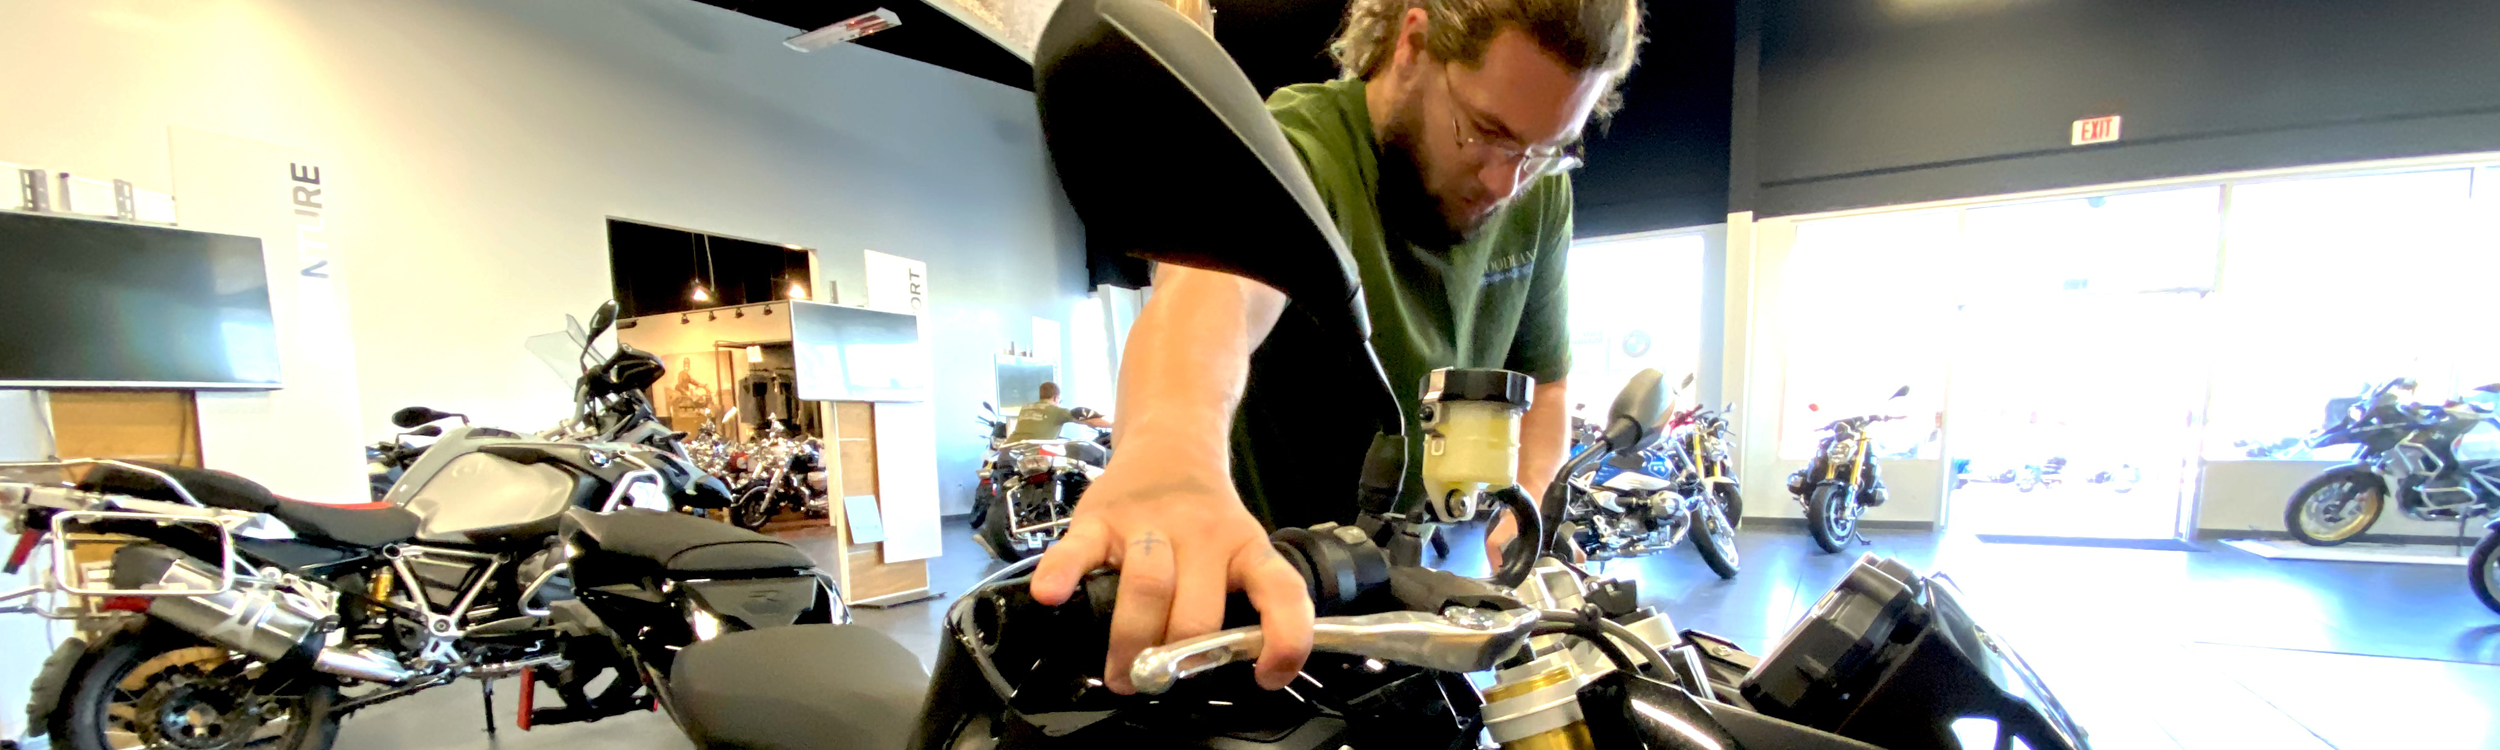 Woodlands Premium Motorcycles employee moving a bike.